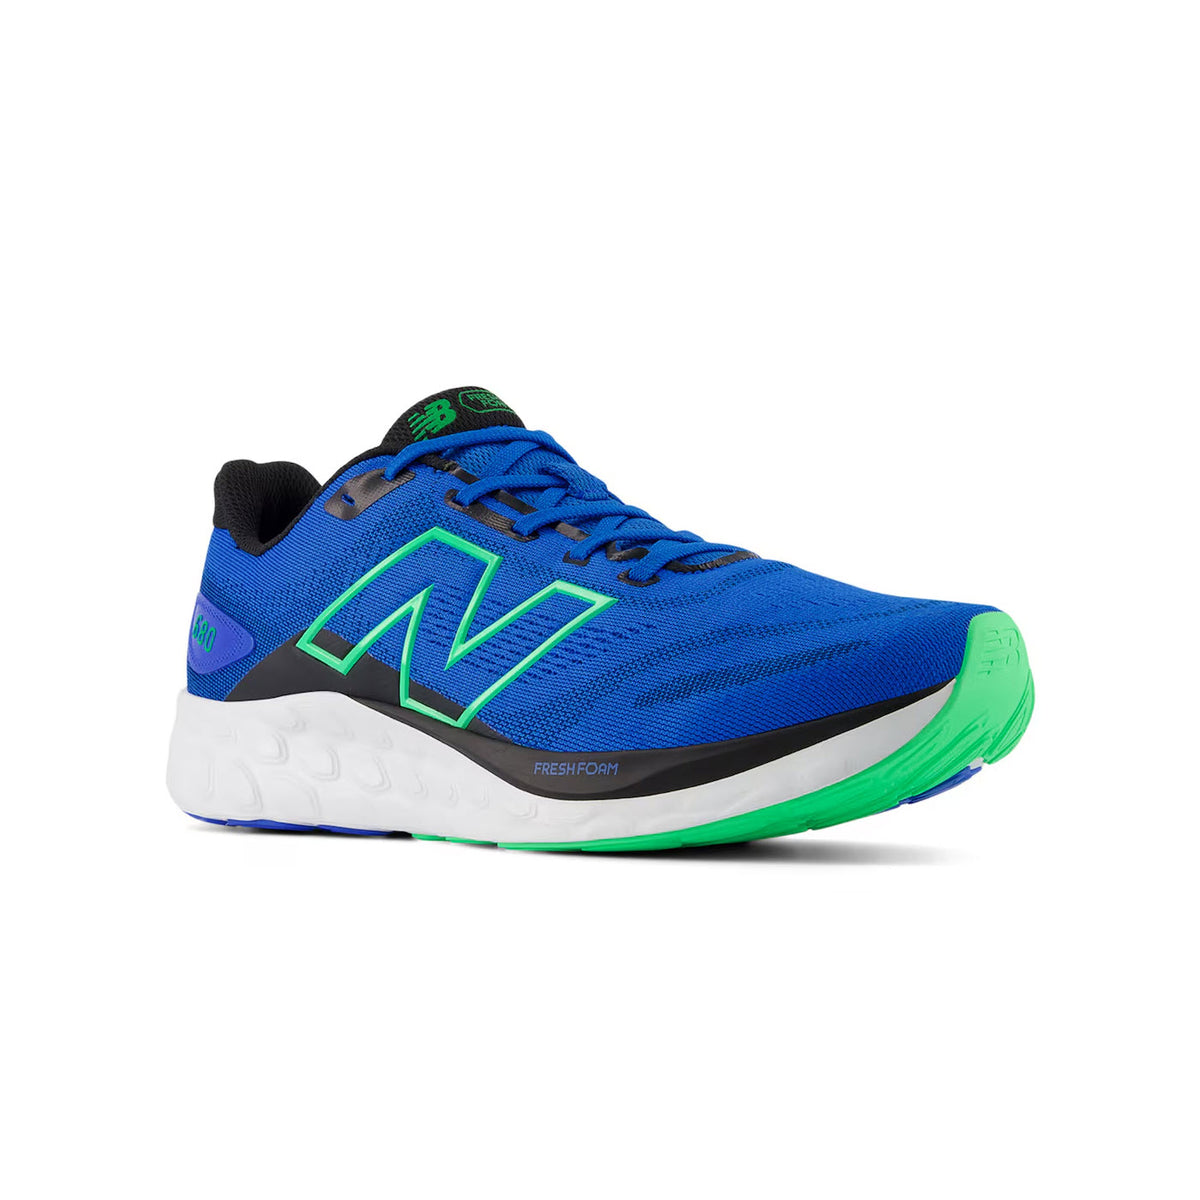 A blue New Balance 680v8 running shoe with a prominent green &quot;N&quot; logo, neon green soles, and black detailing on a white background.